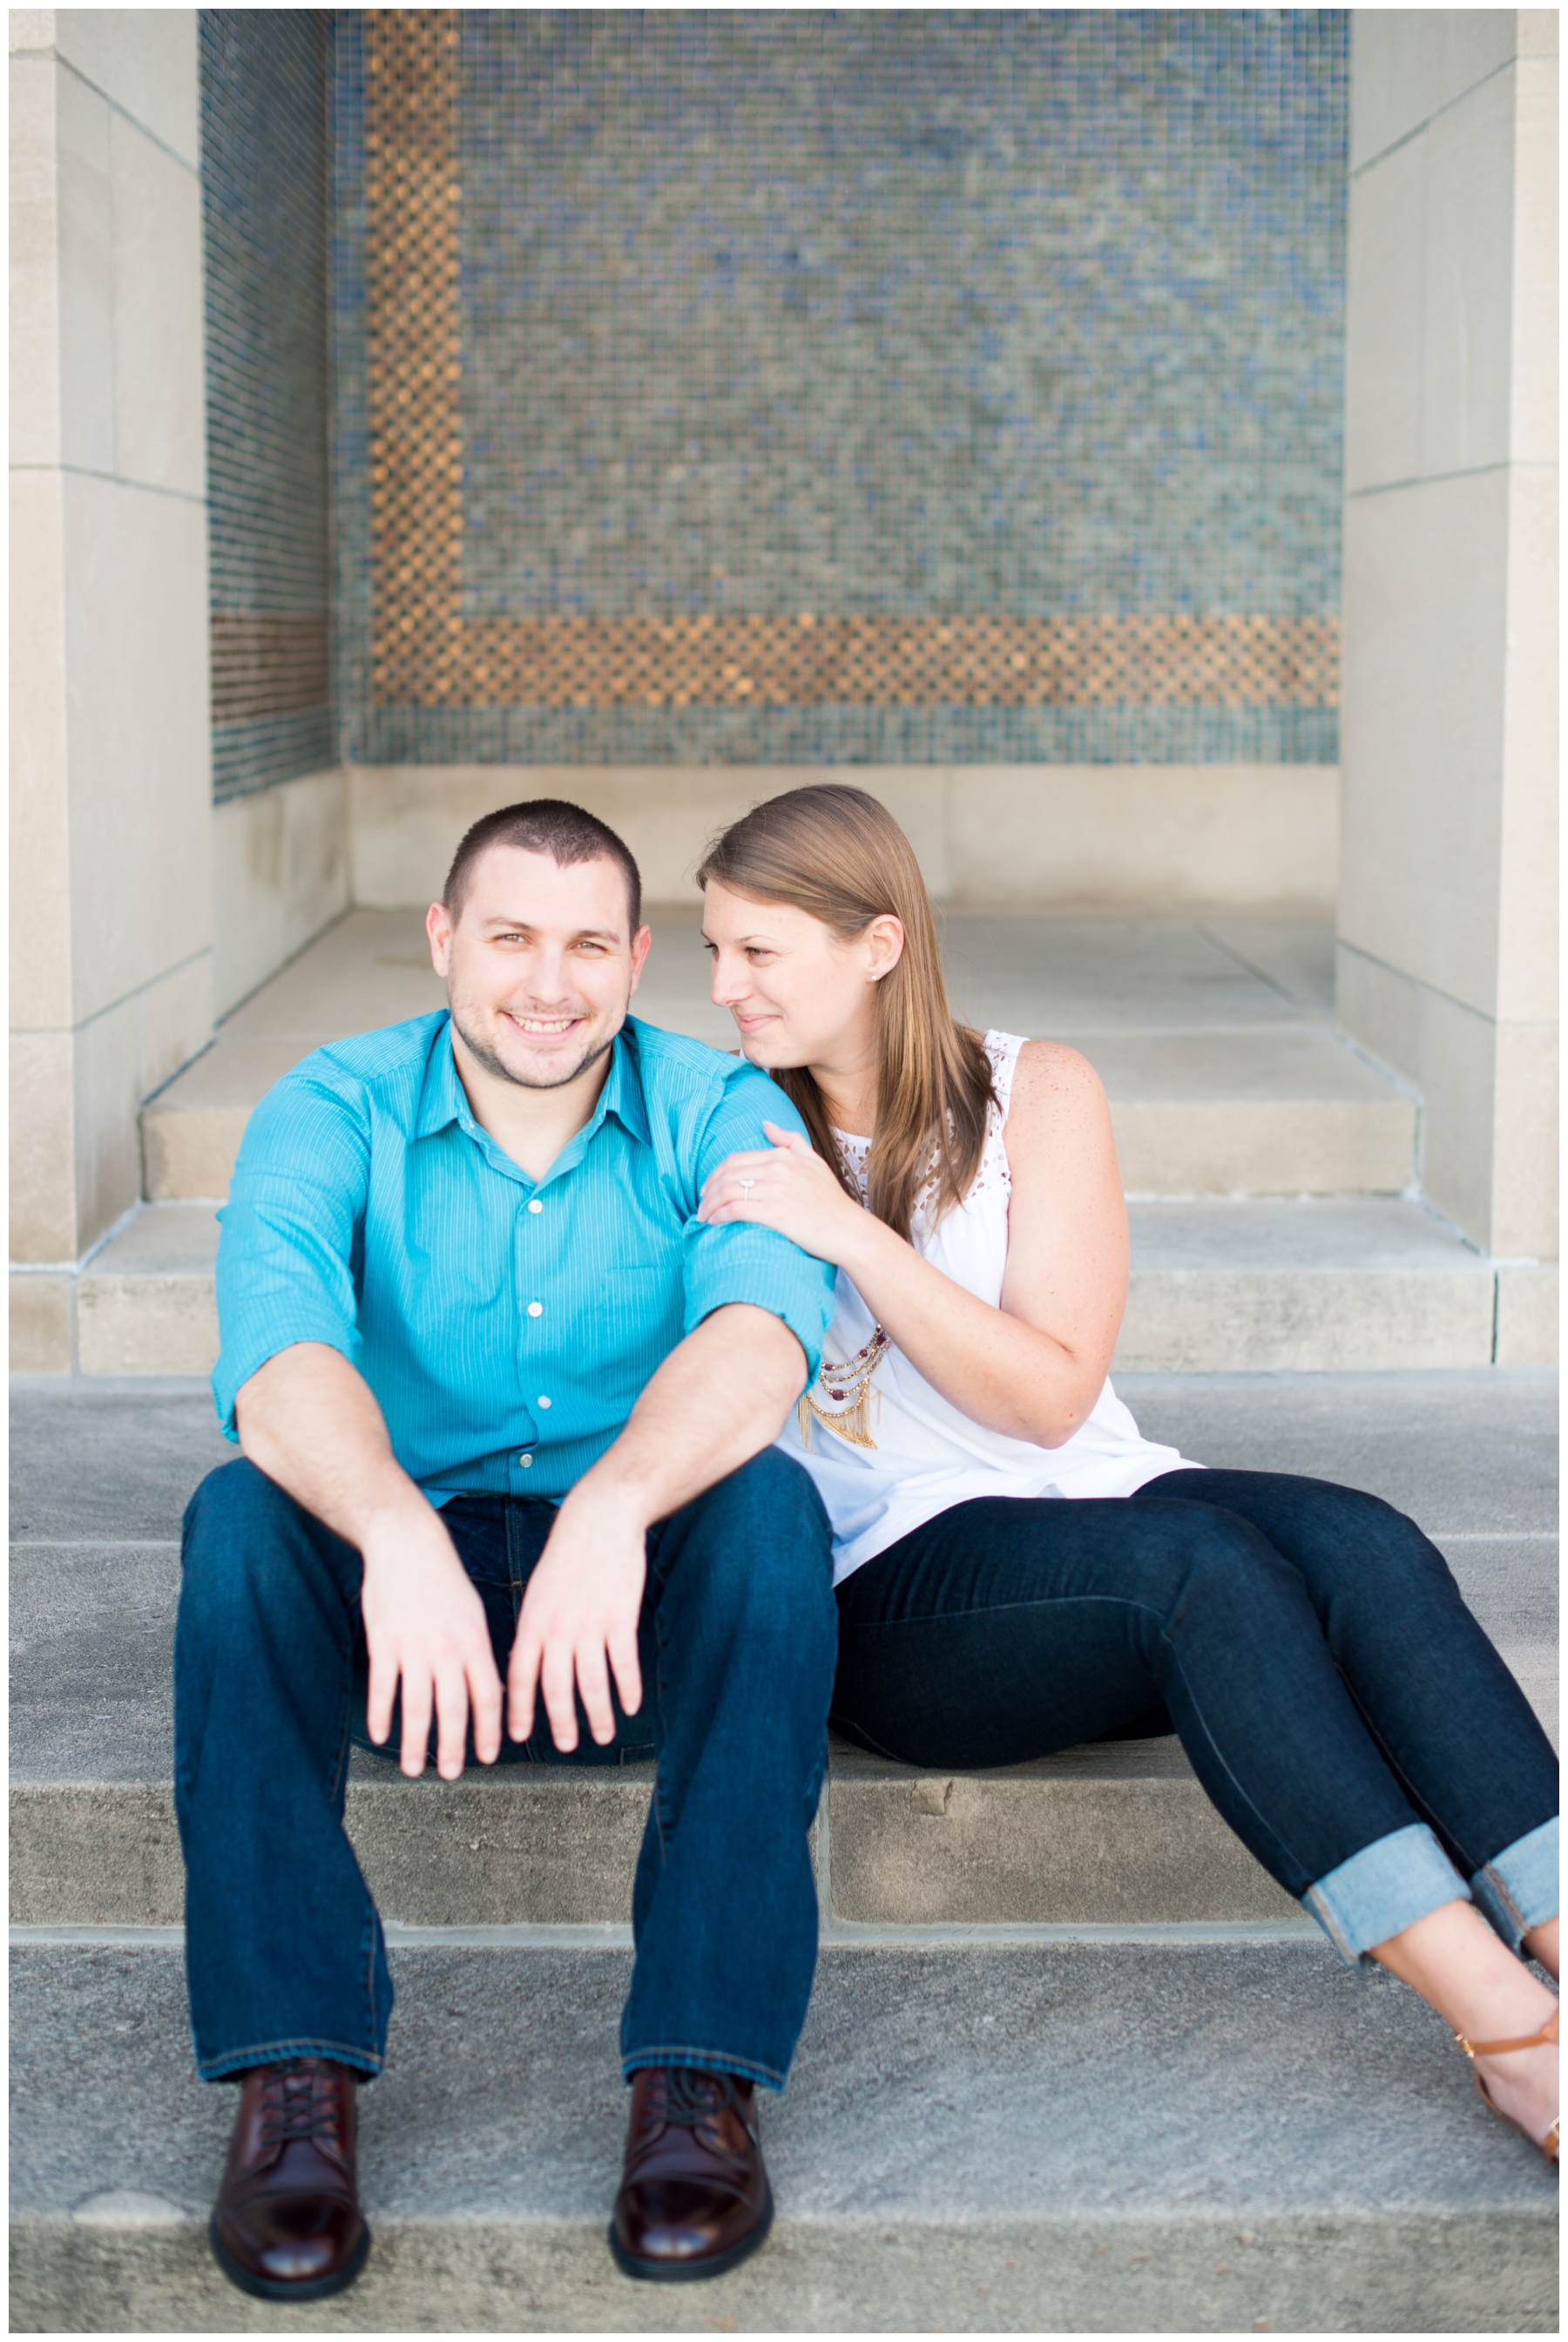 Engagement pictures downtown Kansas City at Liberty Memorial with floral dress and mustard yellow cardigan, fountains and tiled walls with city scape by photographer Lacey Rene Studios